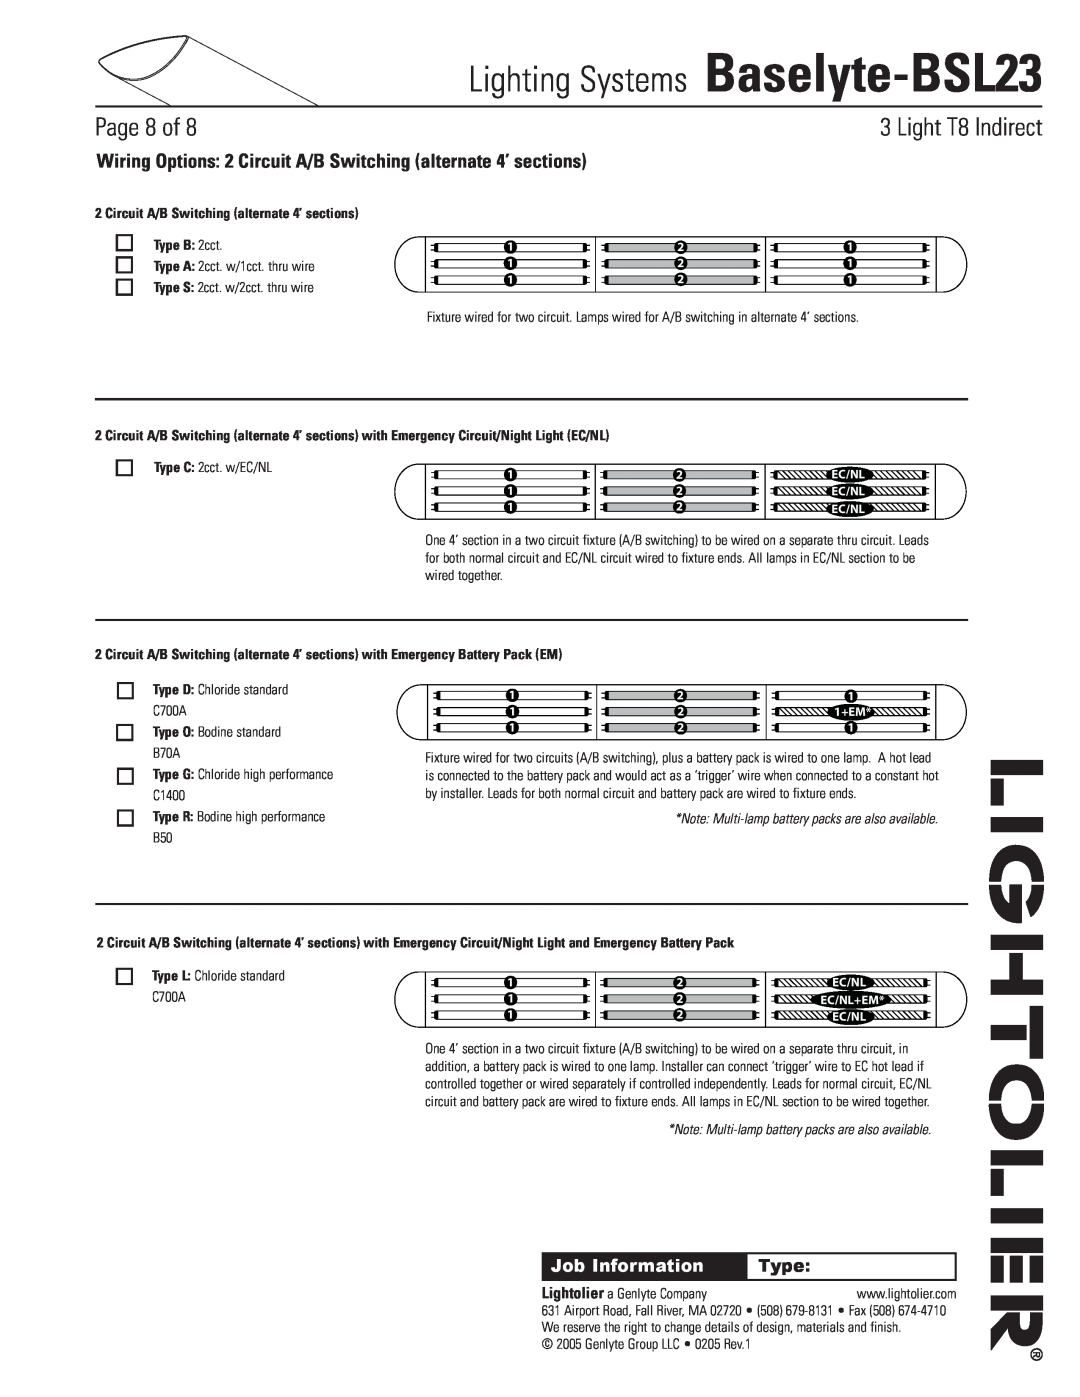 Lightolier Baselyte-BSL23 Circuit A/B Switching alternate 4’ sections, Type B 2cct, Type O Bodine standard B70A, Page of 